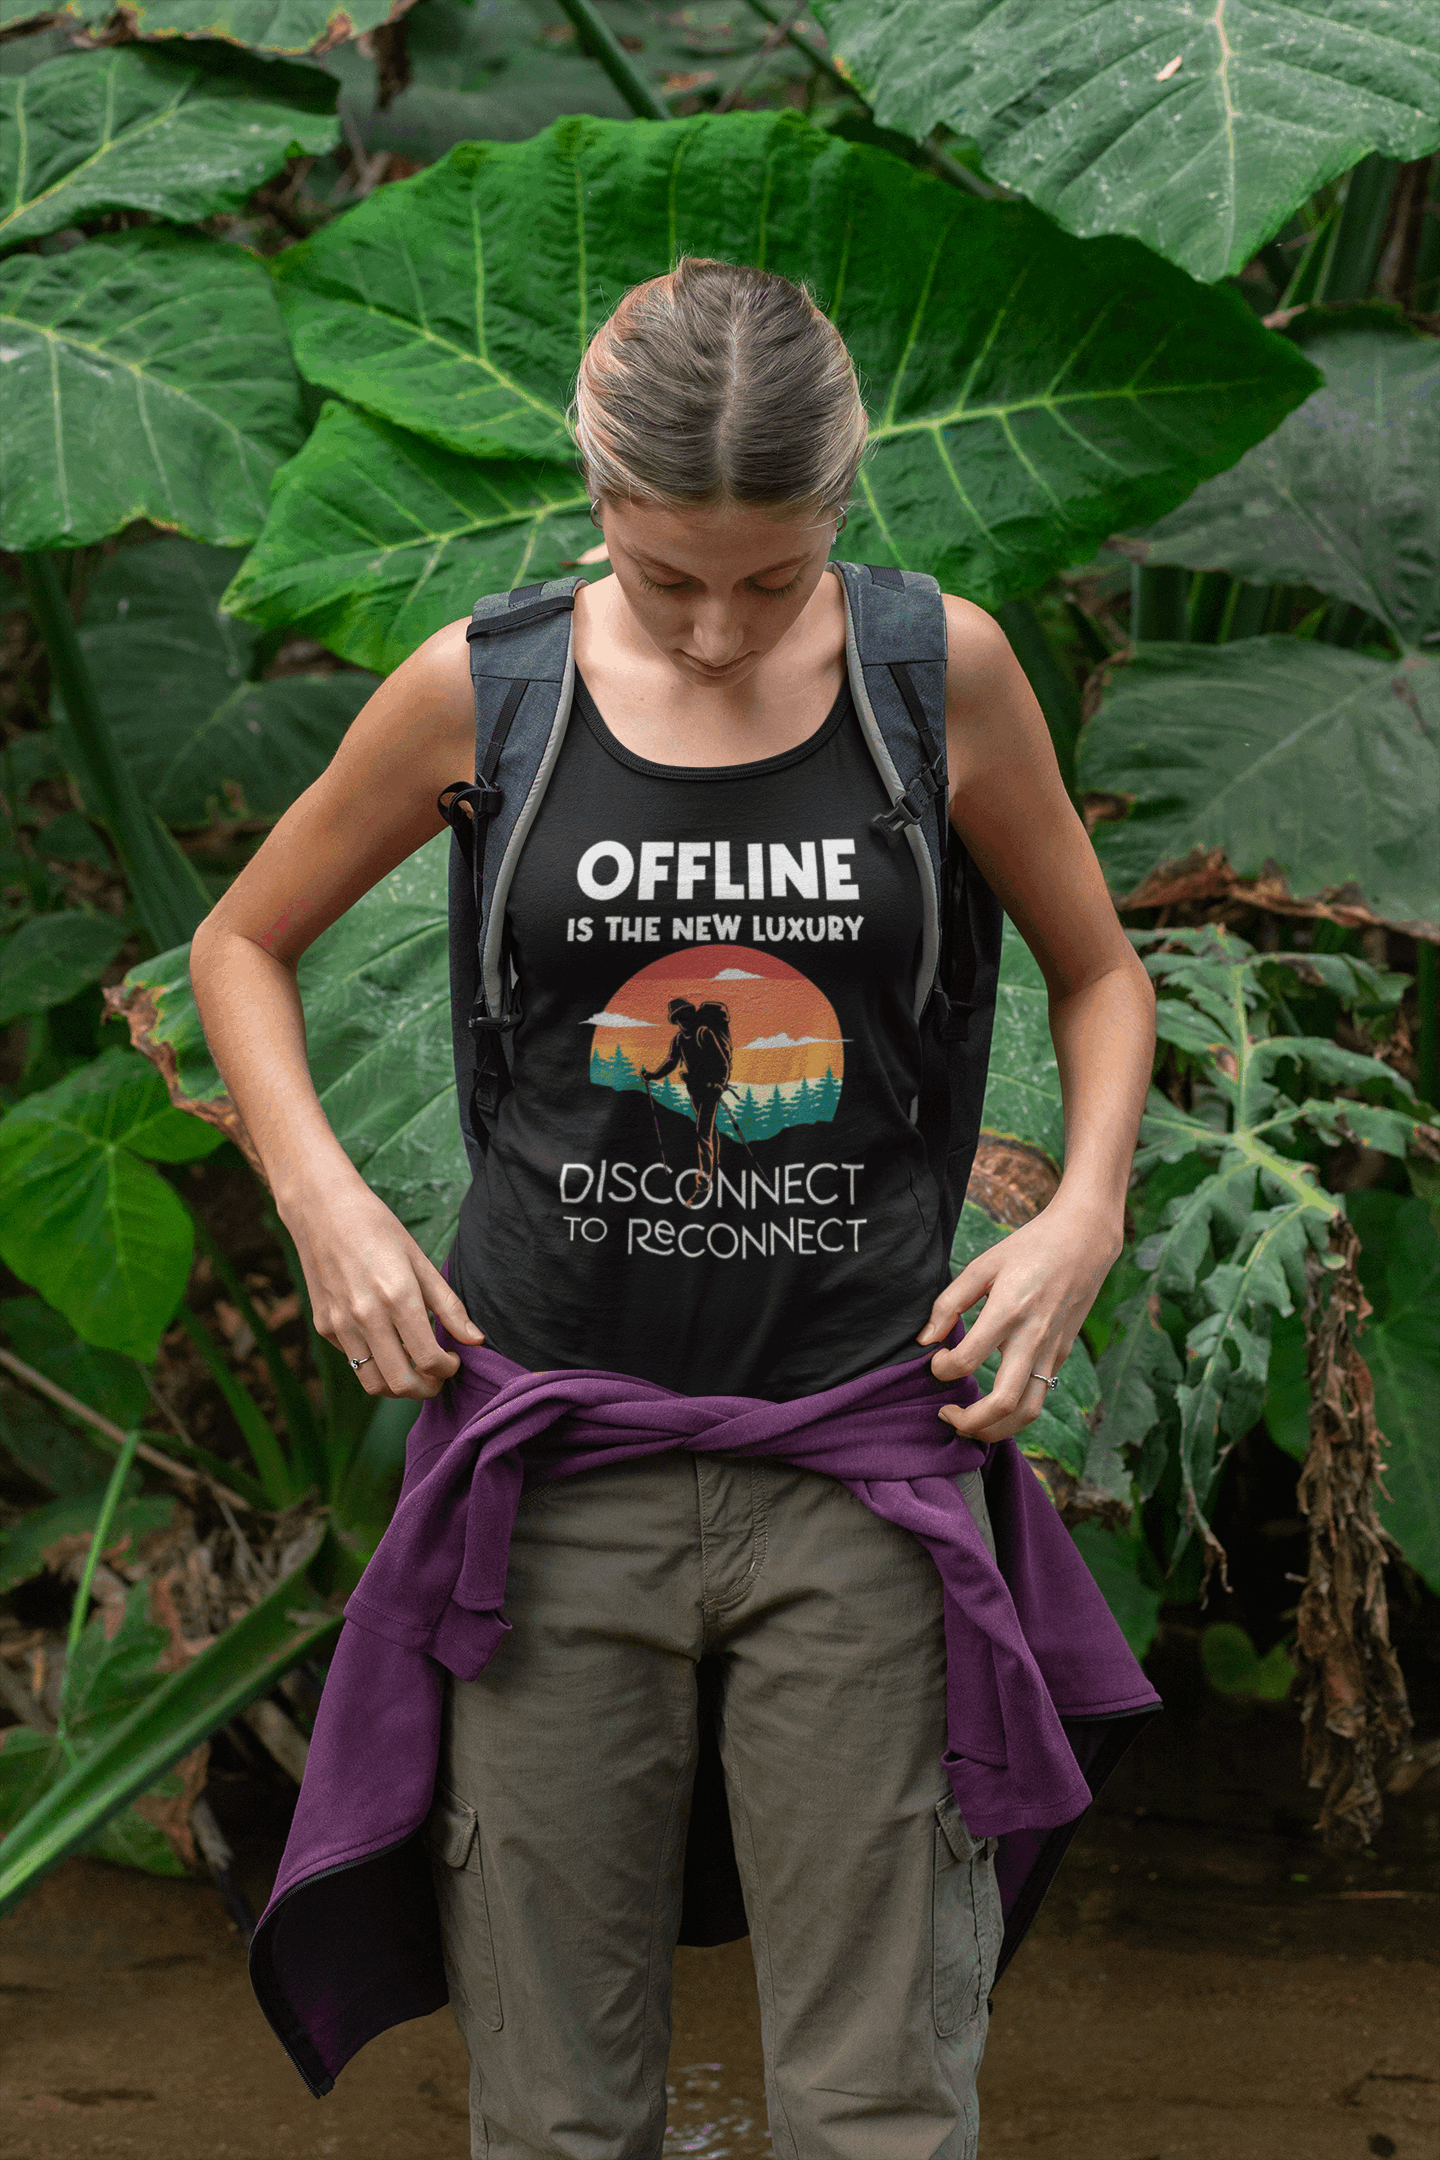 Offline is the new luxury, disconnect to reconnect